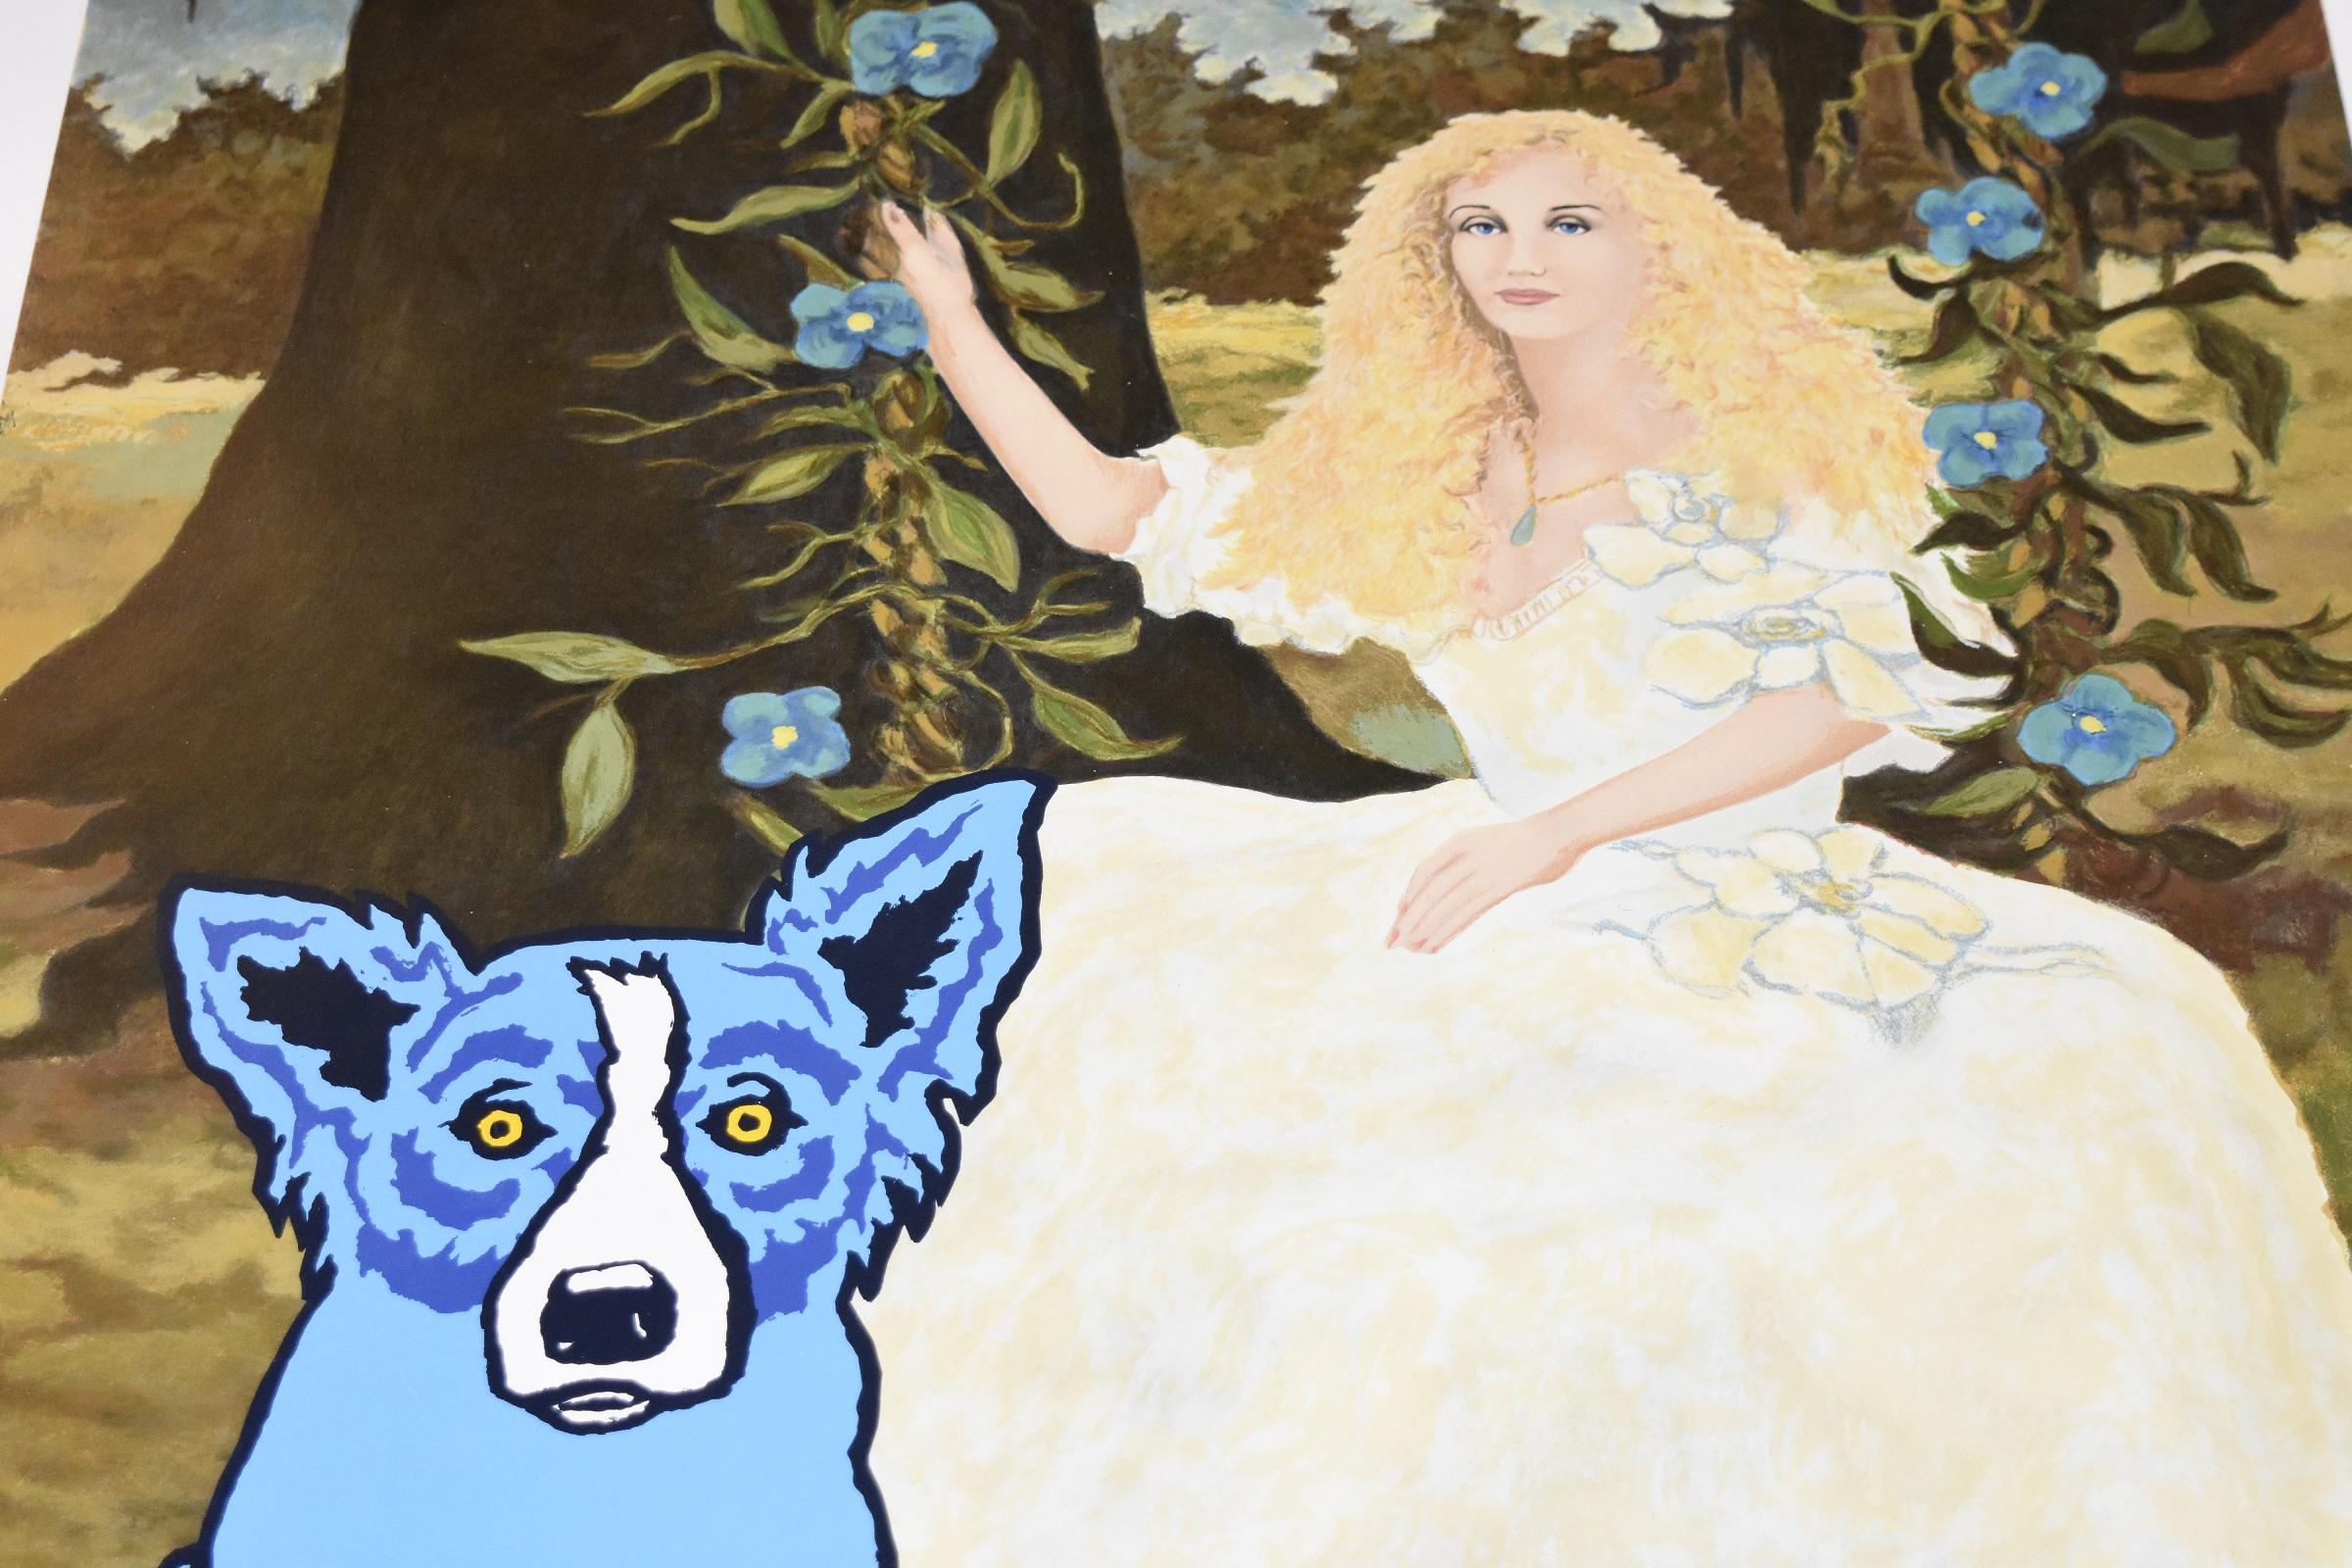 These Blue Dog works consist of a blonde female 